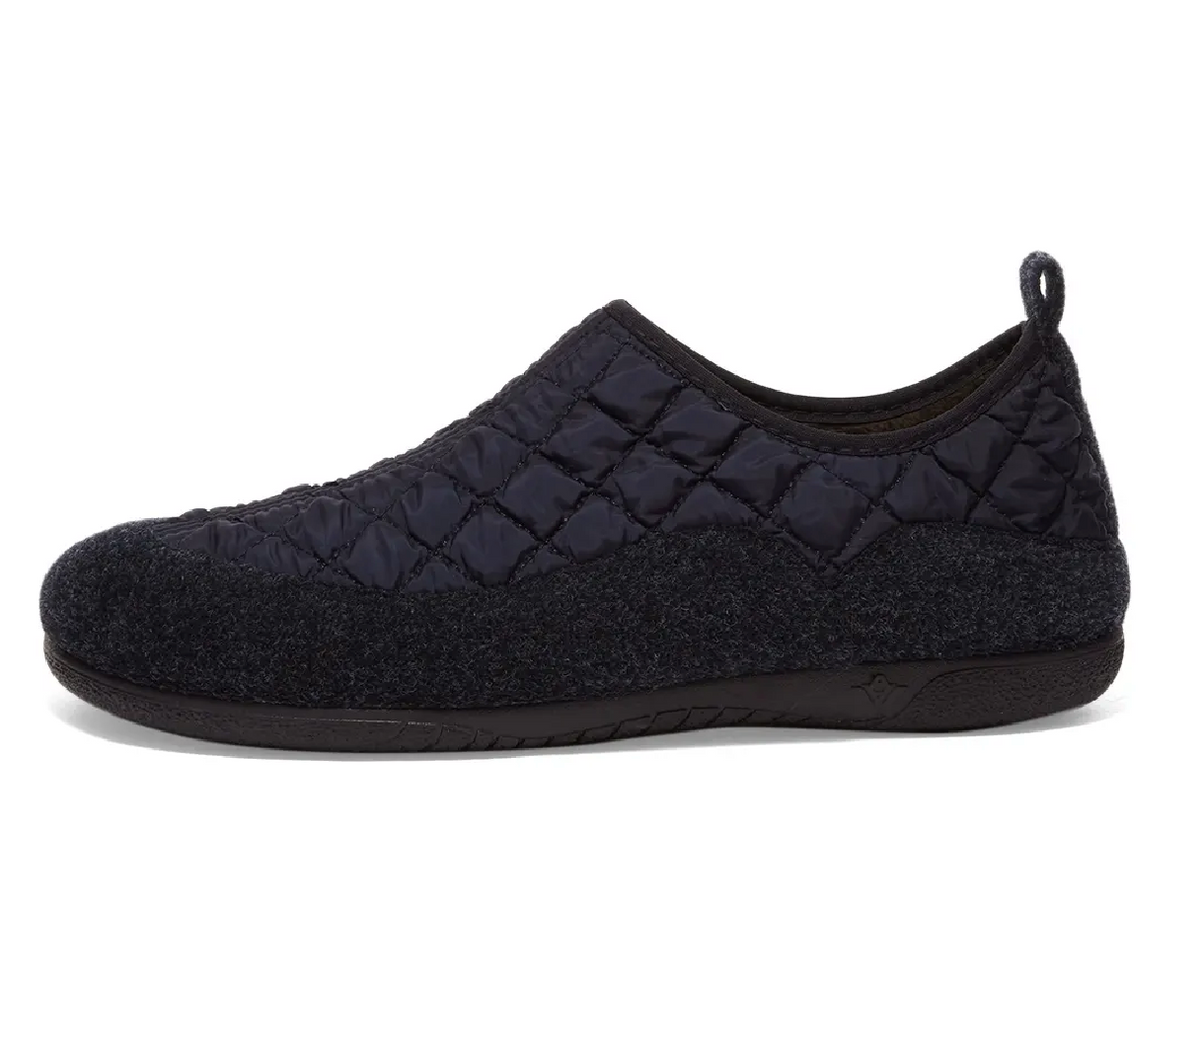 Gurus Quilted Roomshoes - Navy , Shoes, Gurus, Working Title